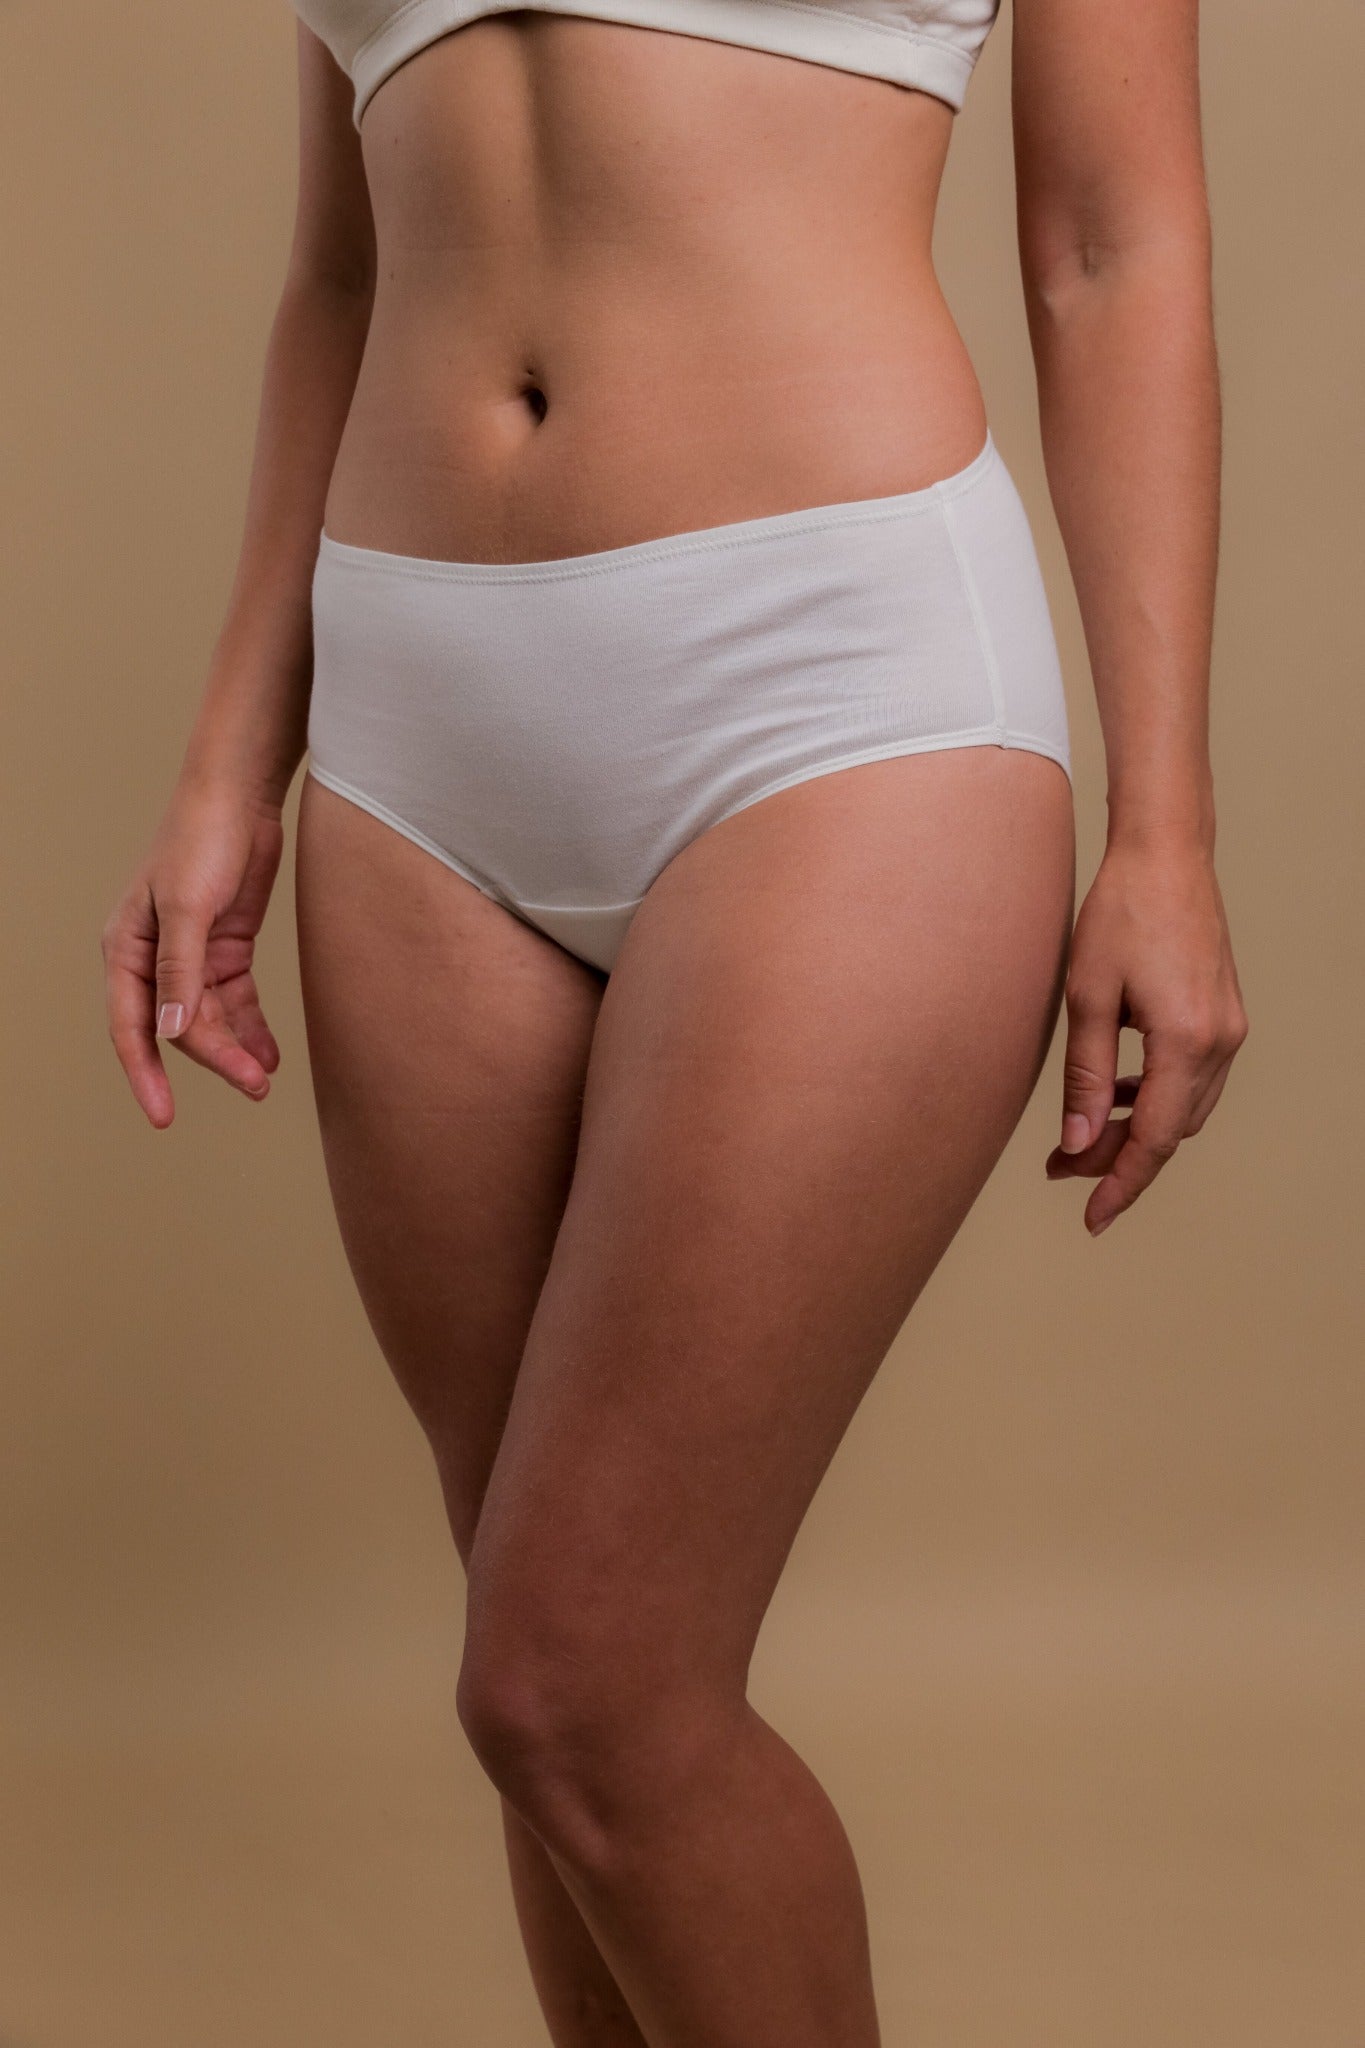 Women's Hernia Support and Pain Relief Brief Palestine